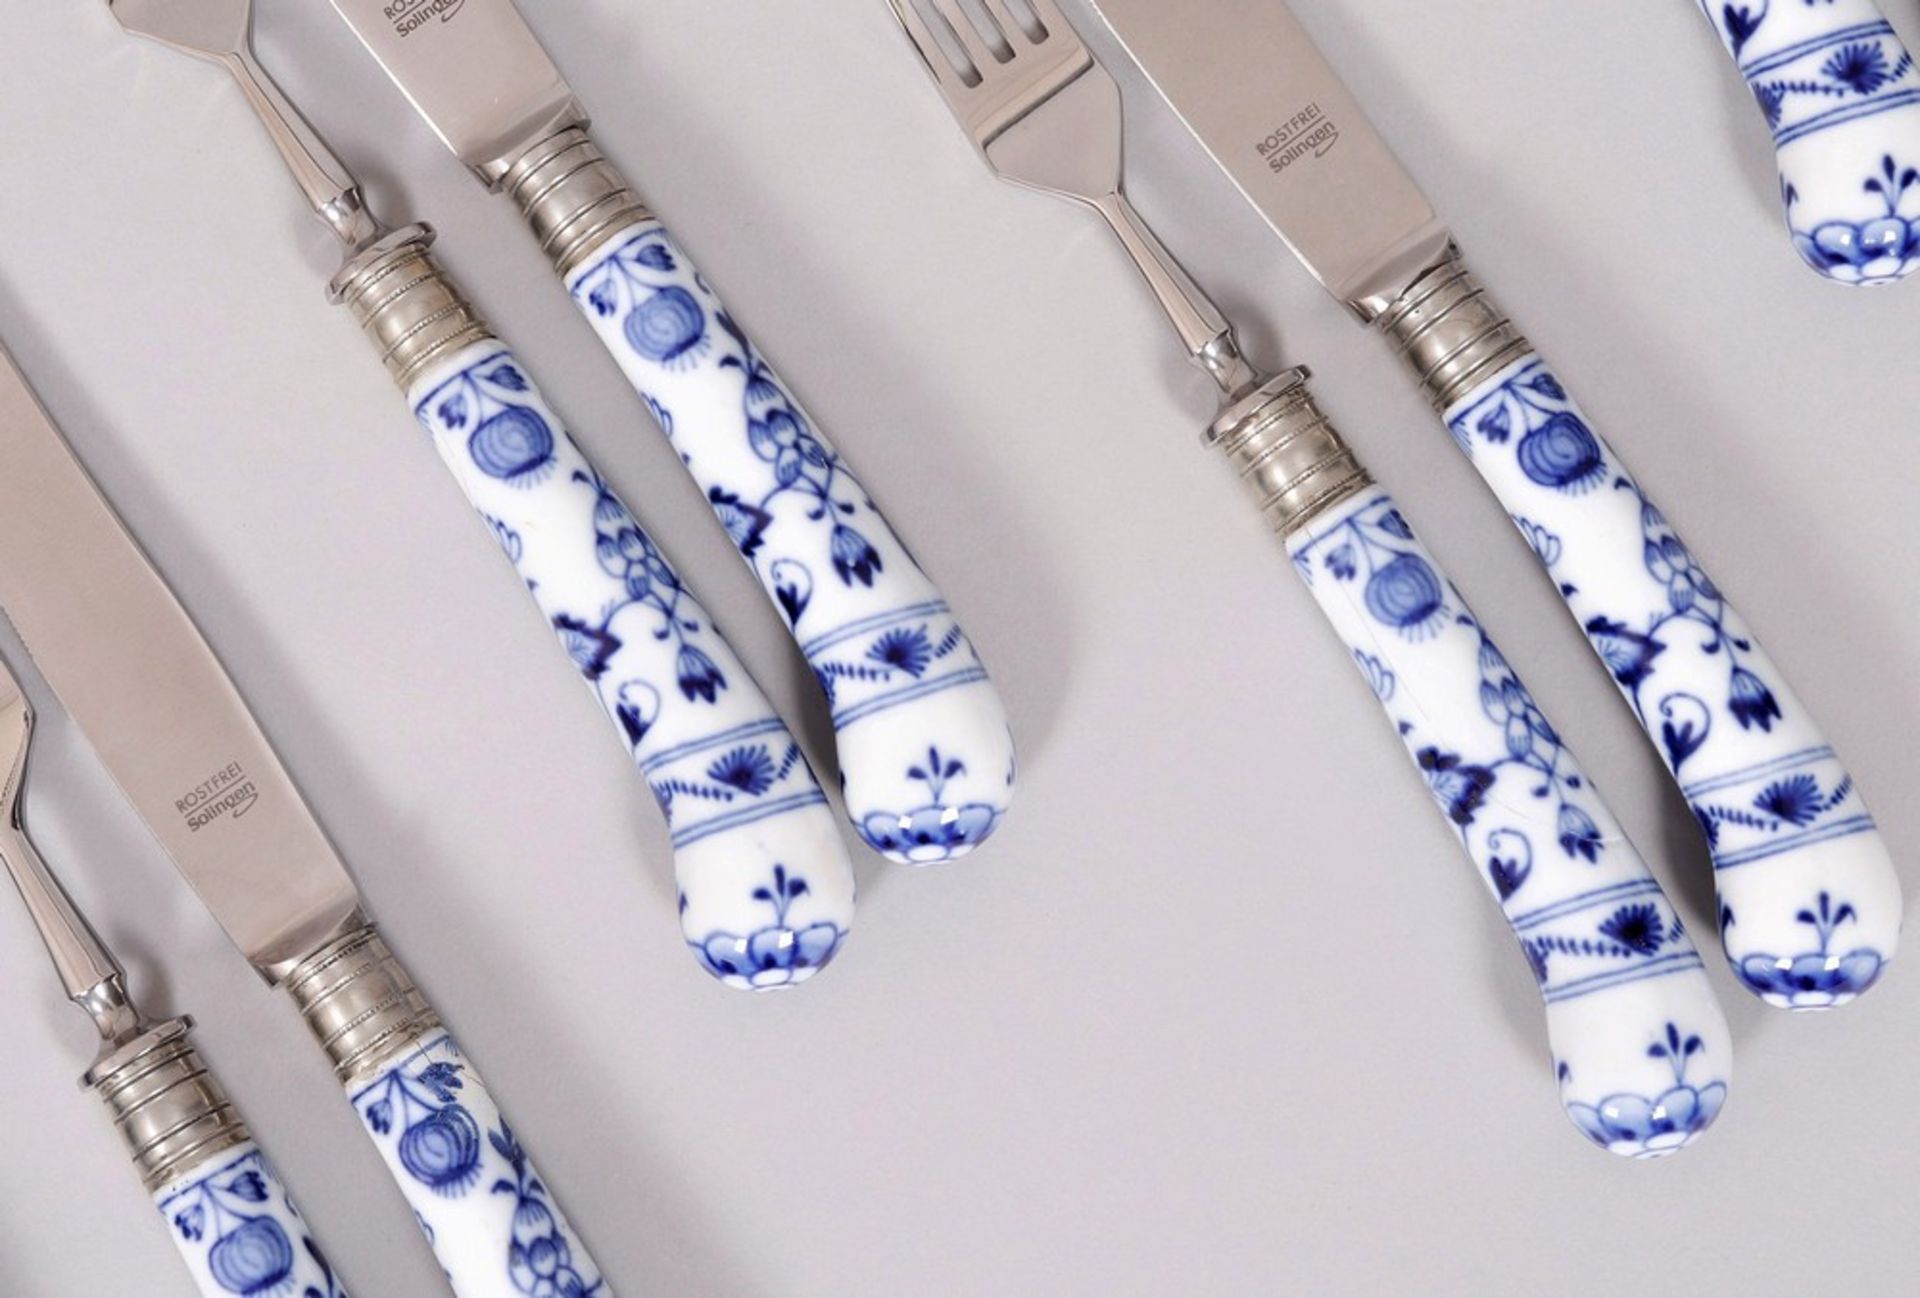 Part cutlery set, Meissen and others, "Zwiebelmuster" decor, Knauf period (c. 1900)porcelain/steel, - Image 2 of 4